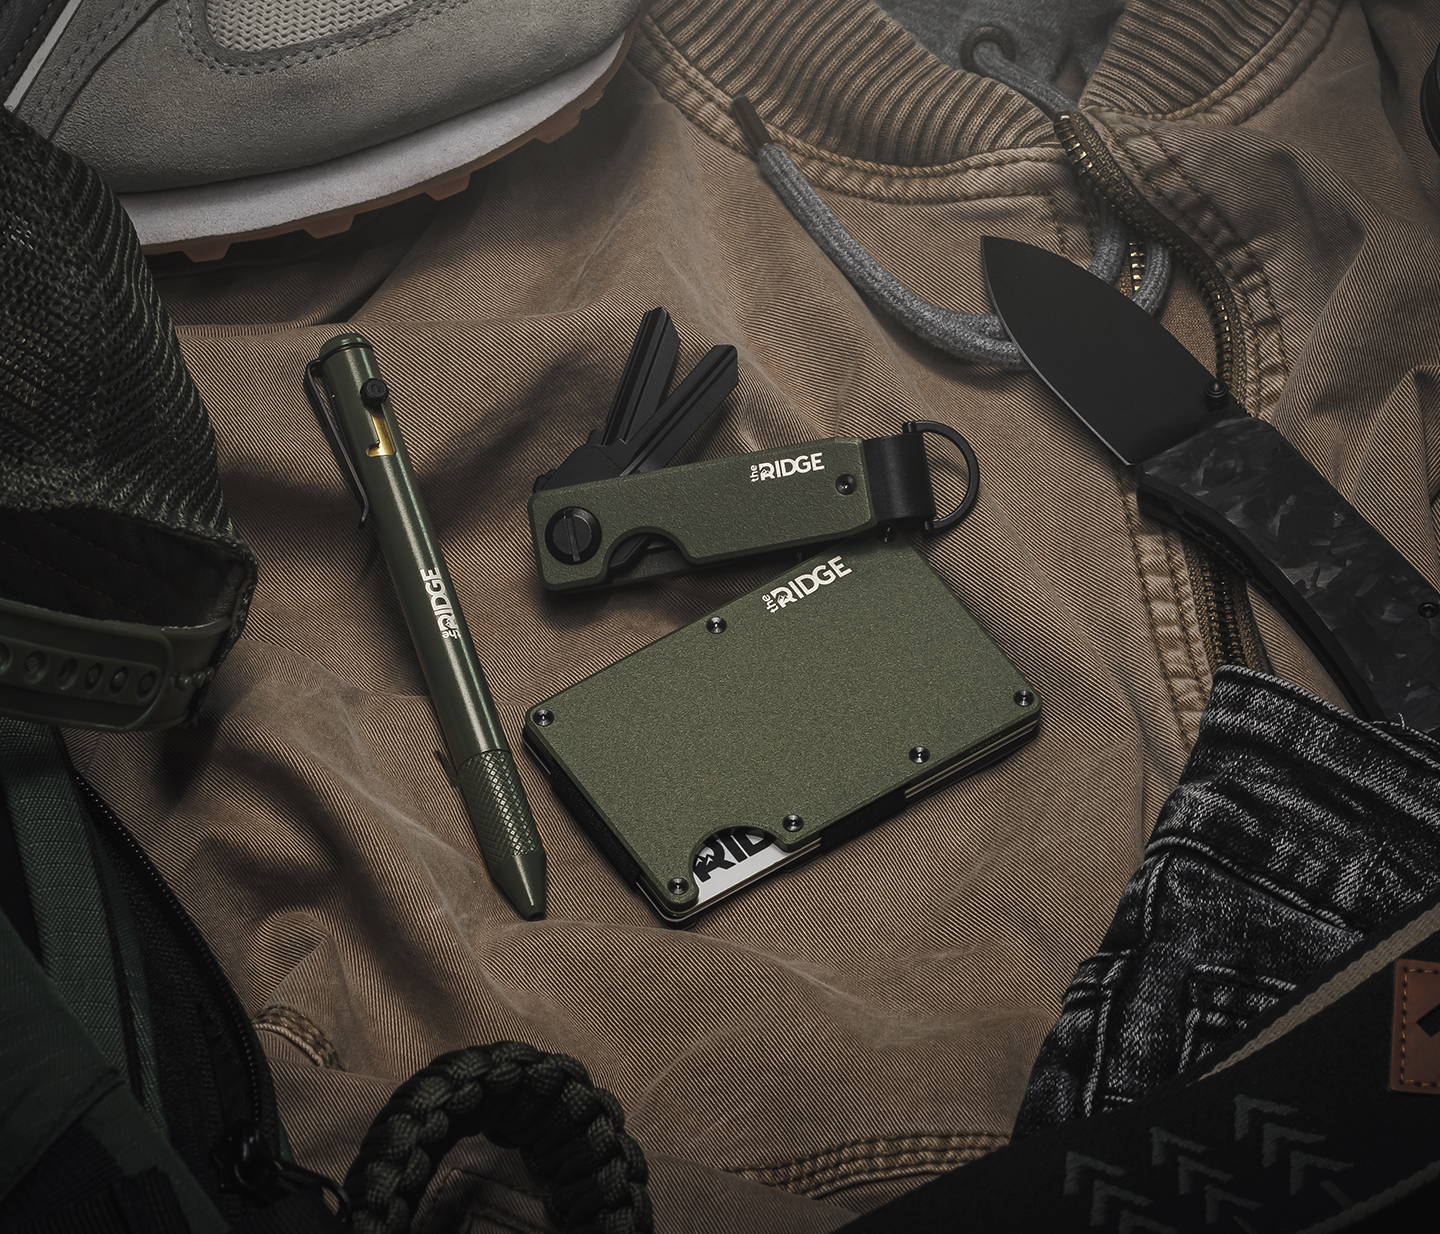 Matte Olive Ridge wallets, keycases and pens for everyday carry